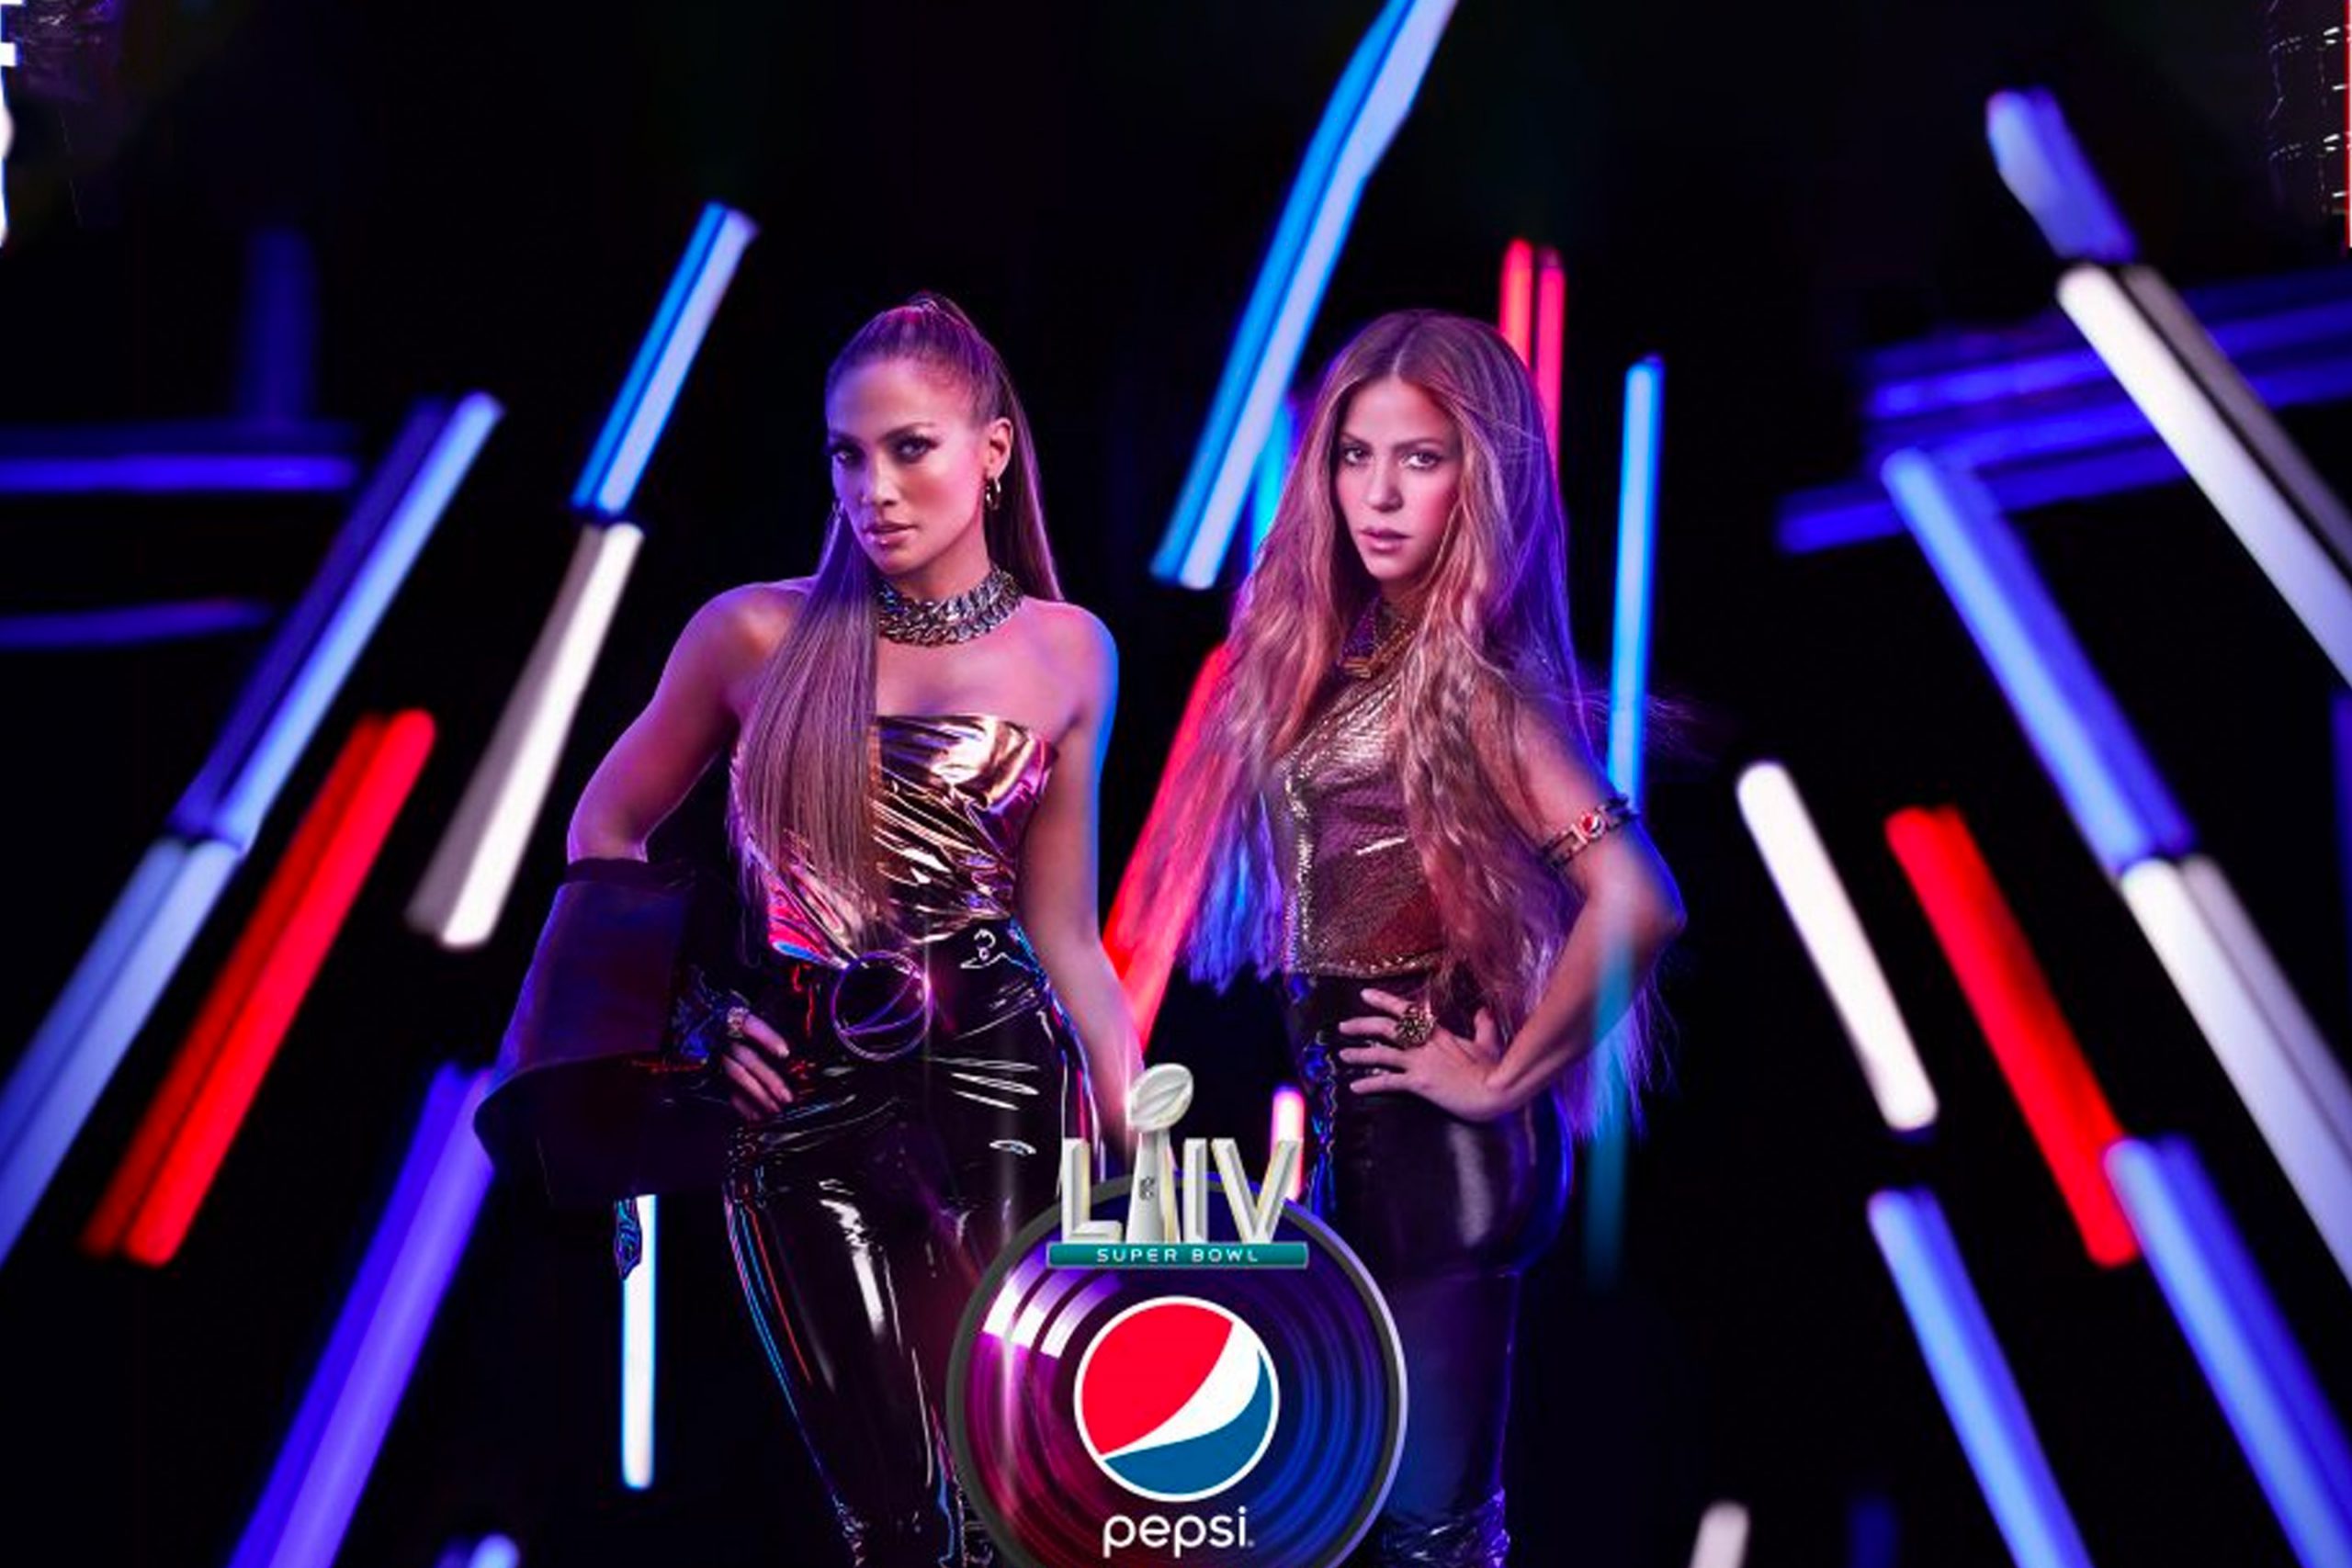 Pepsi Super Bowl poster with Shakira and